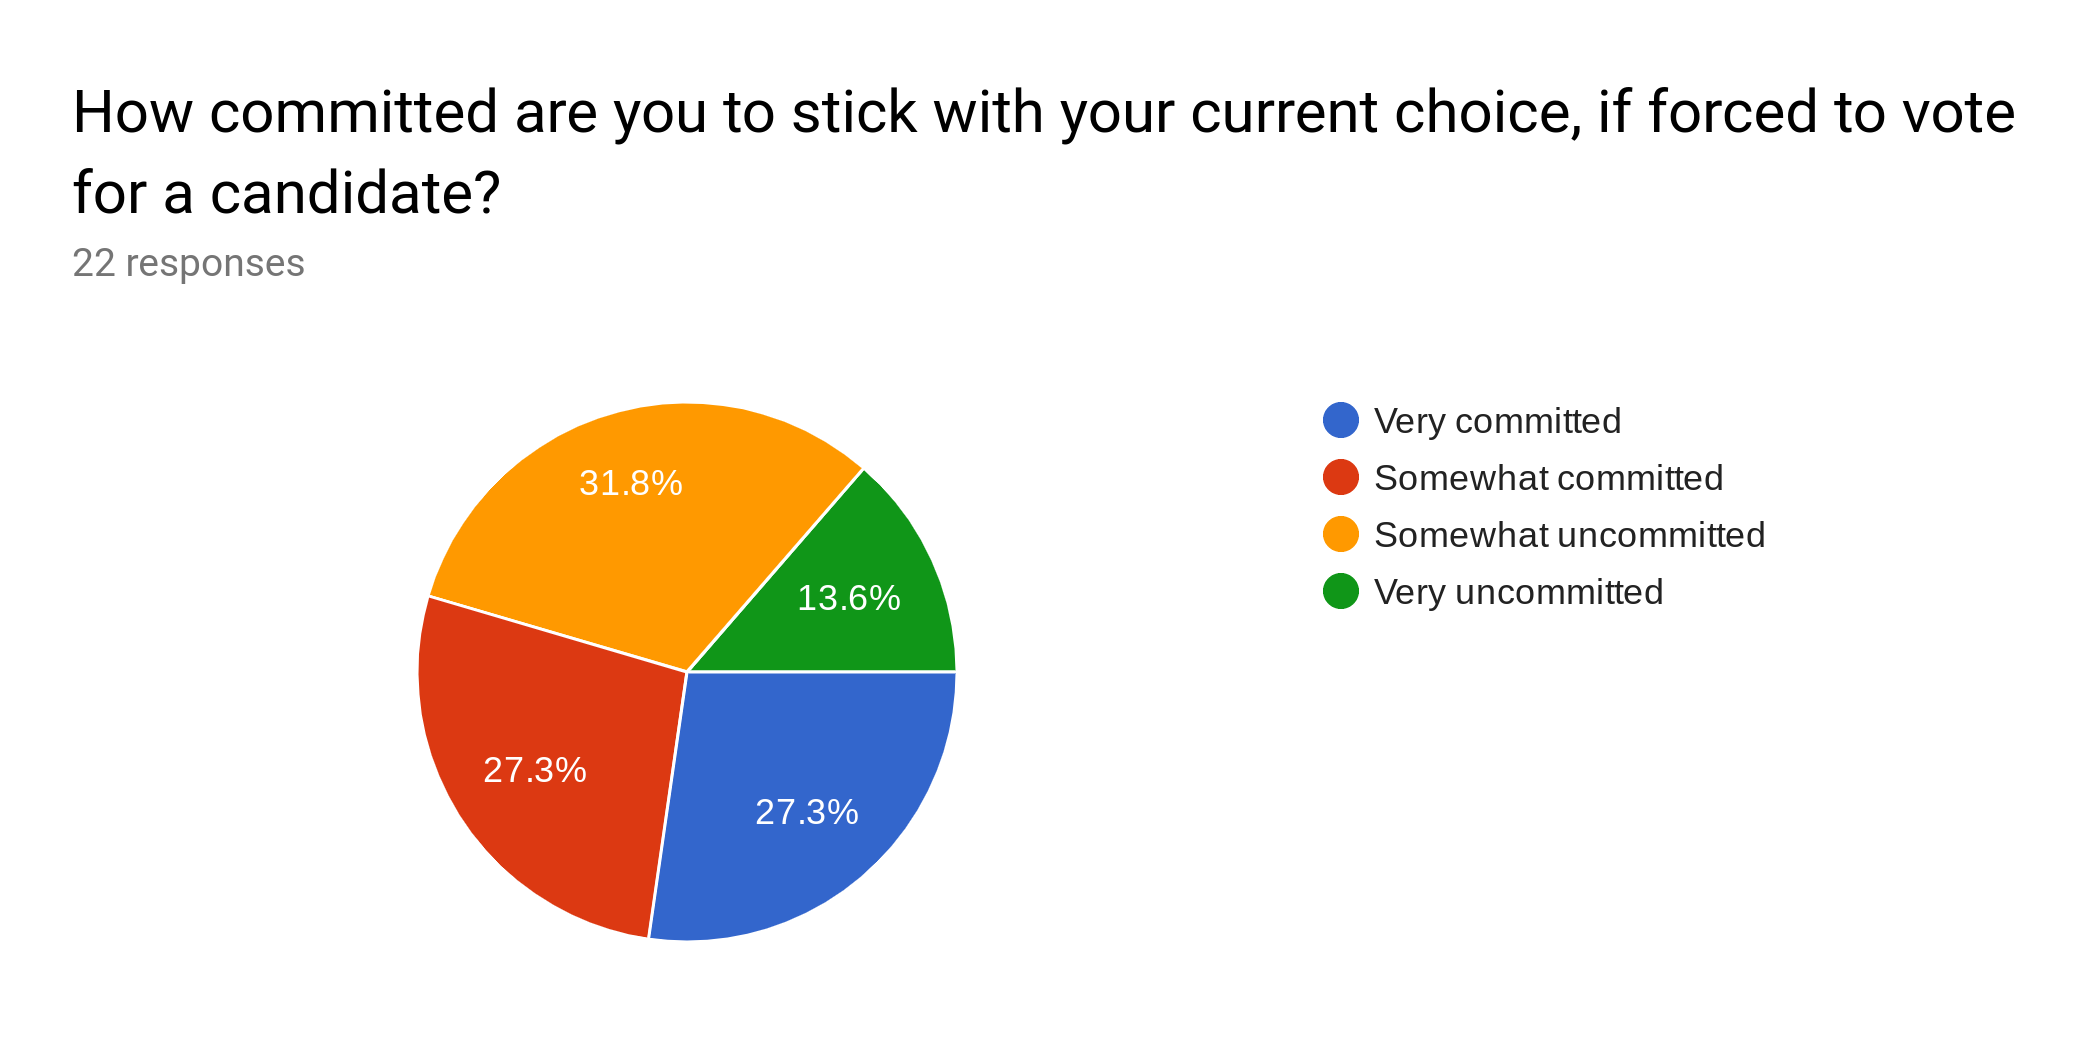 Forms response chart. Question title: How committed are you to stick with your current choice, if forced to vote for a candidate?. Number of responses: 22 responses.